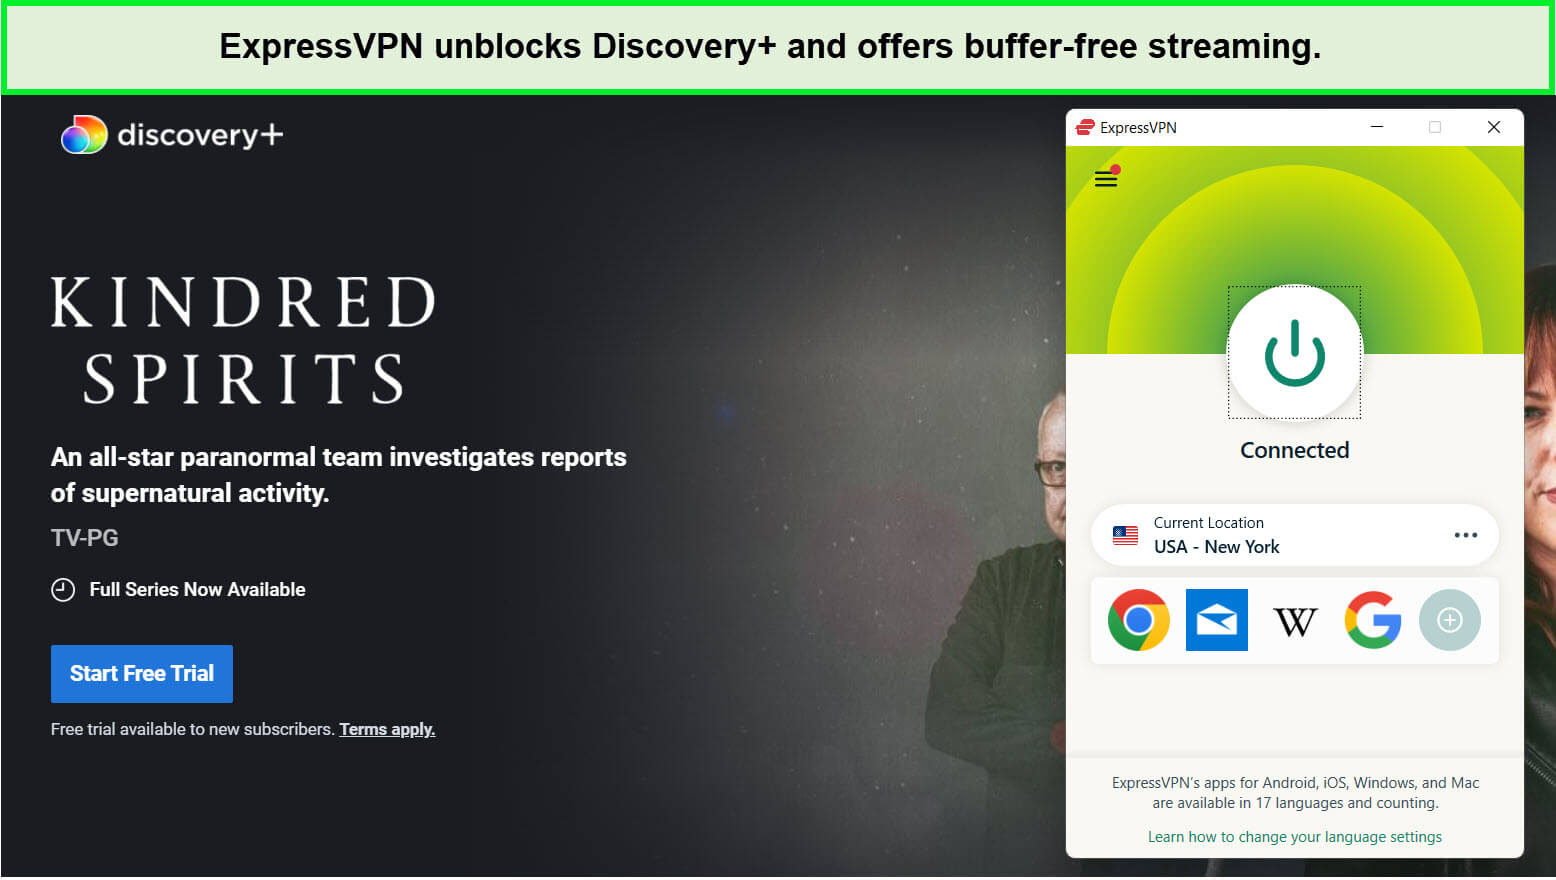 expressvpn-unblocks-kindred-spirits-s7-on-discovery-plus-in-australia